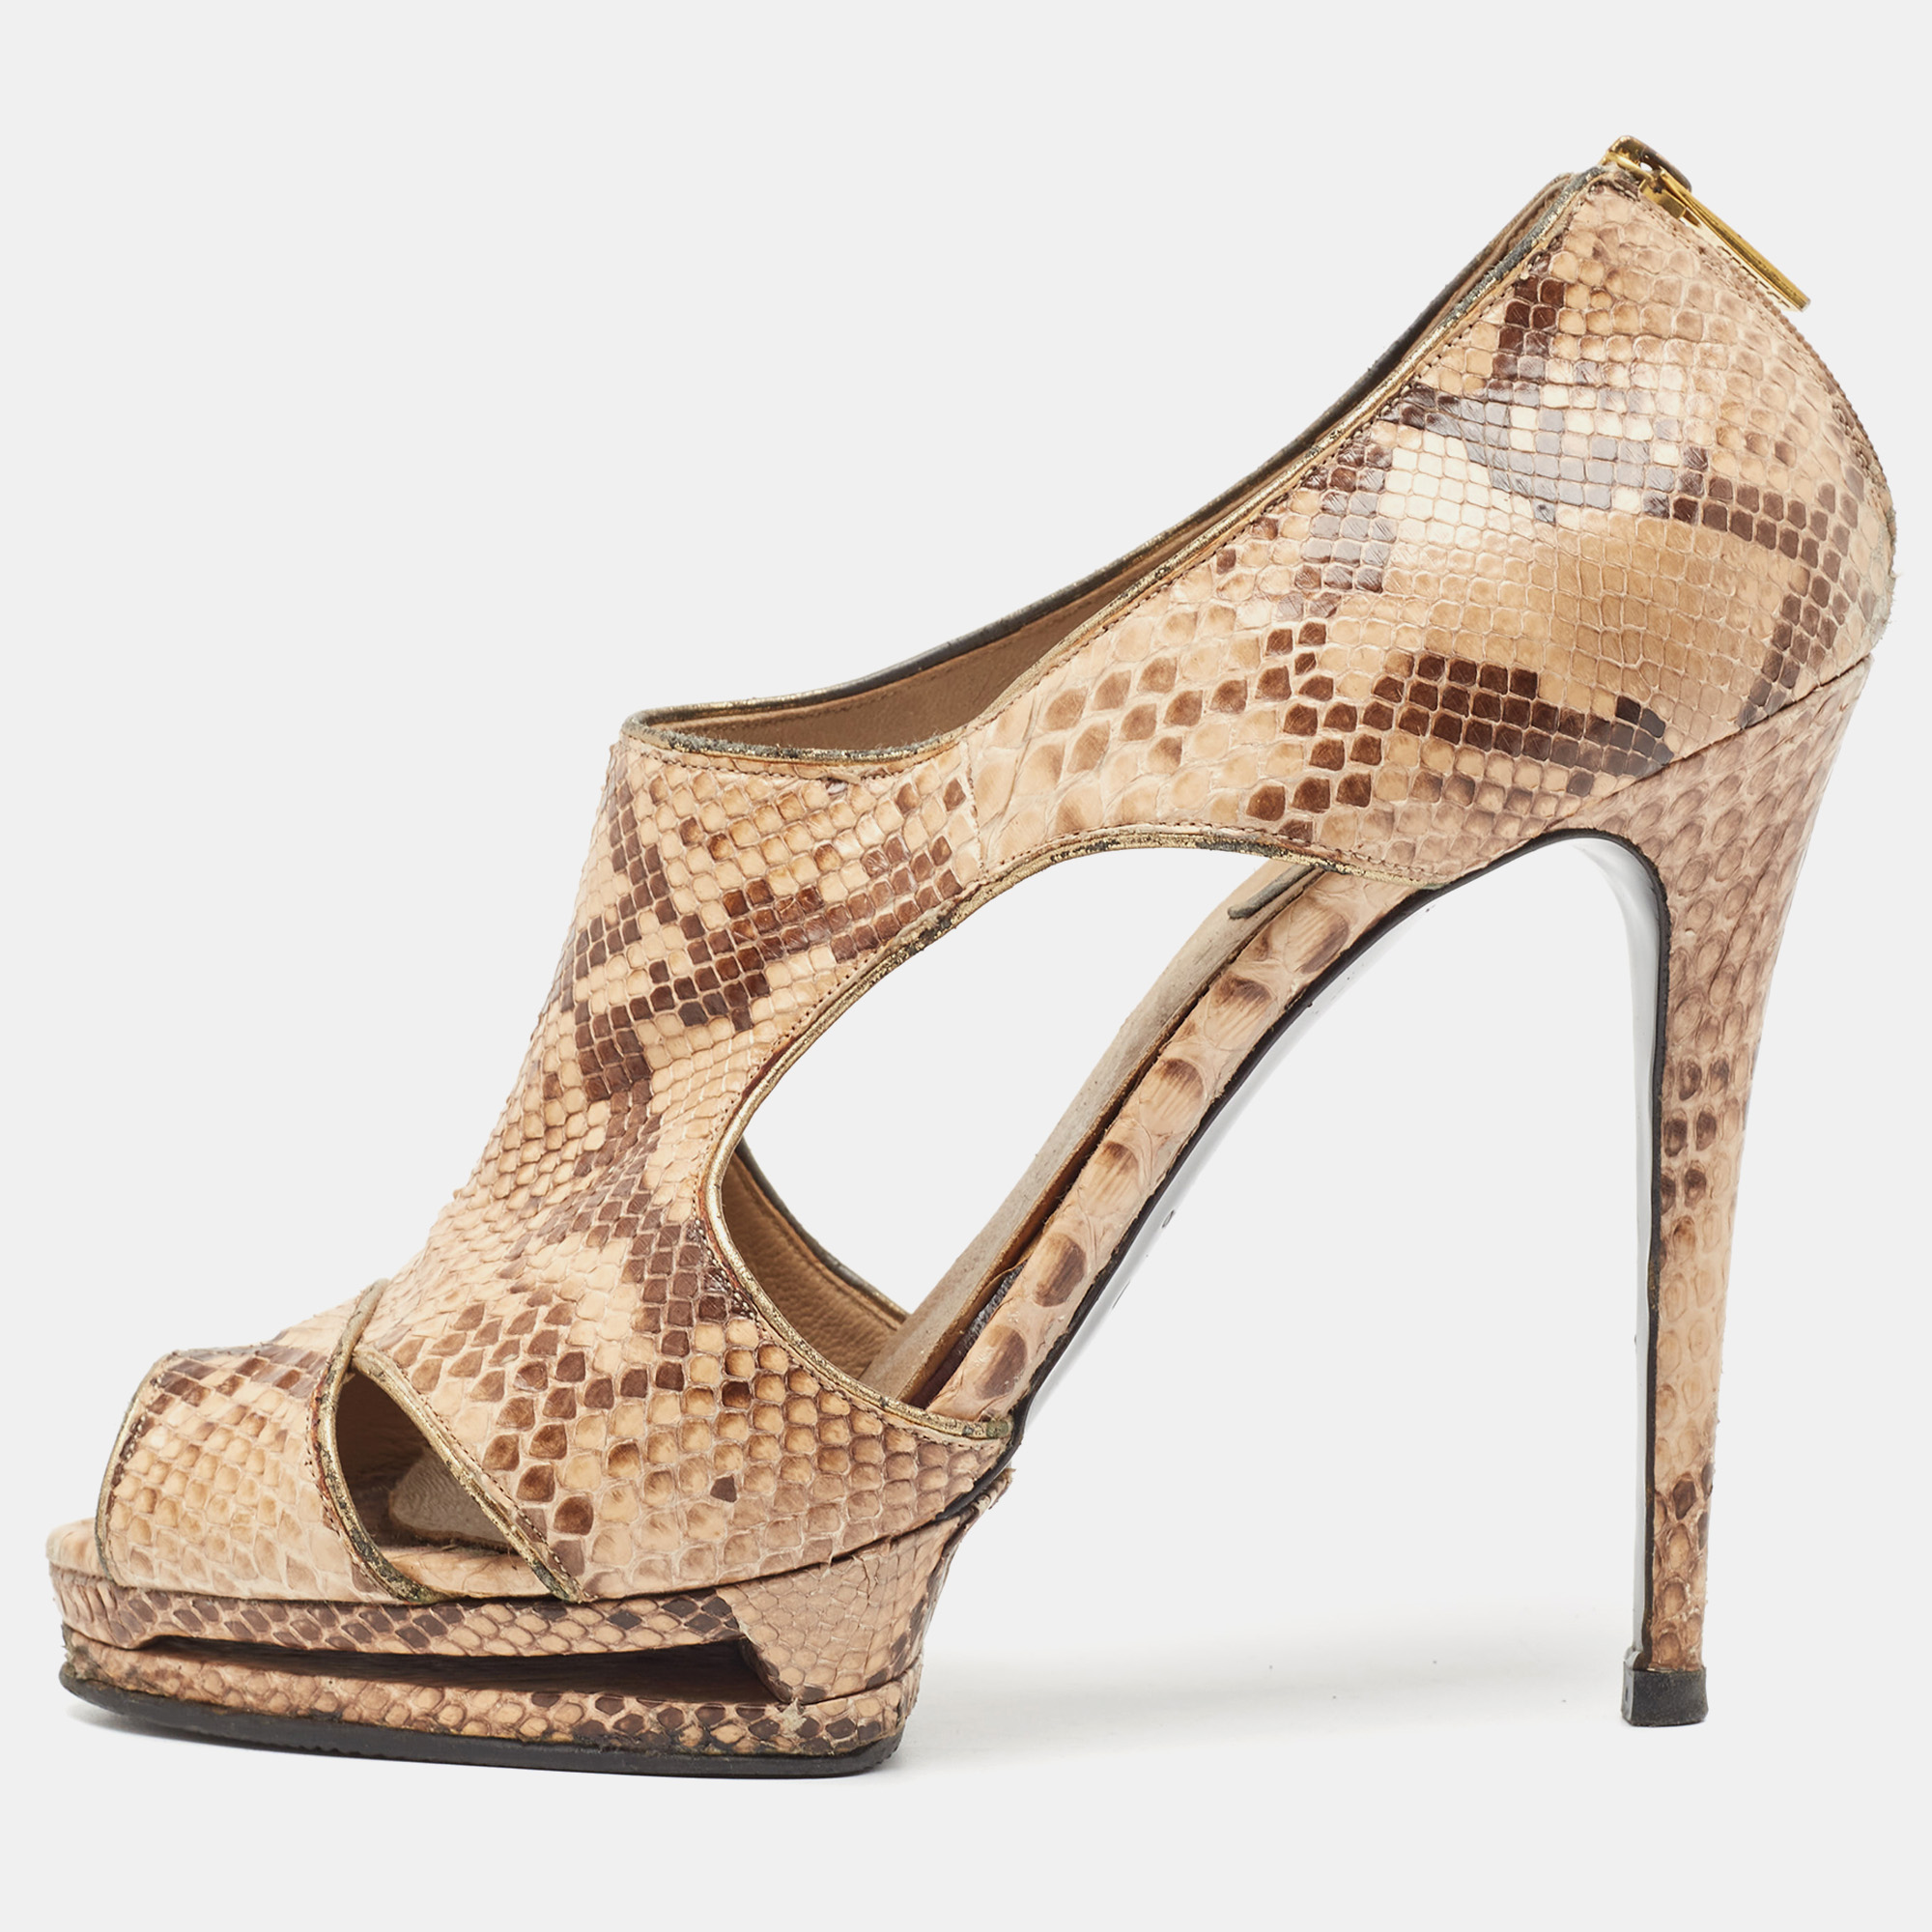 Le silla two tone snakeskin cut out open toe pumps size 40